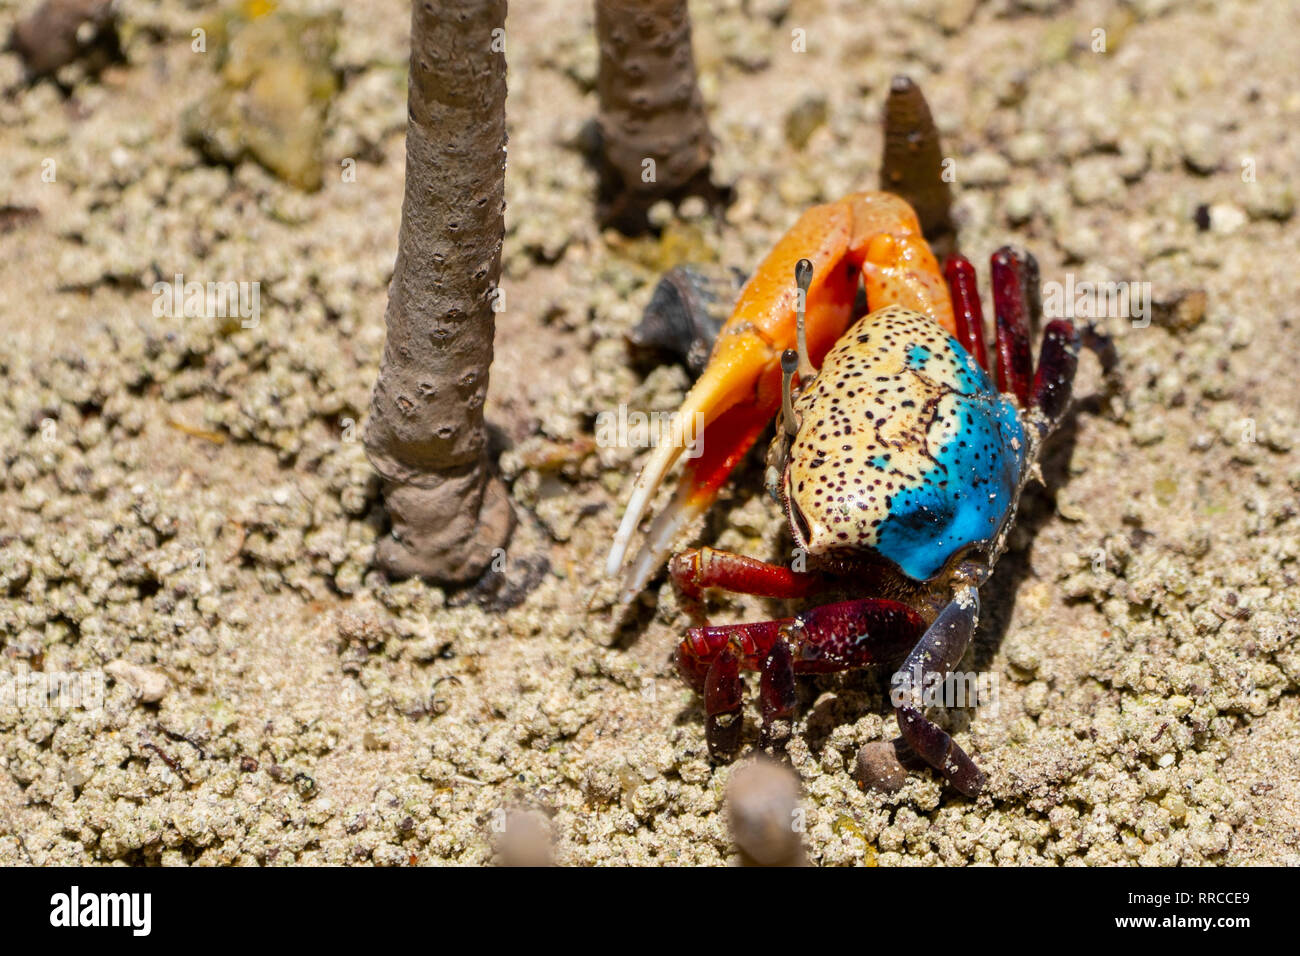 Fiddler crab (Uca tetragonon) male Photographed in a Mangrove swamp, Seychelles Curieuse Island in September Stock Photo